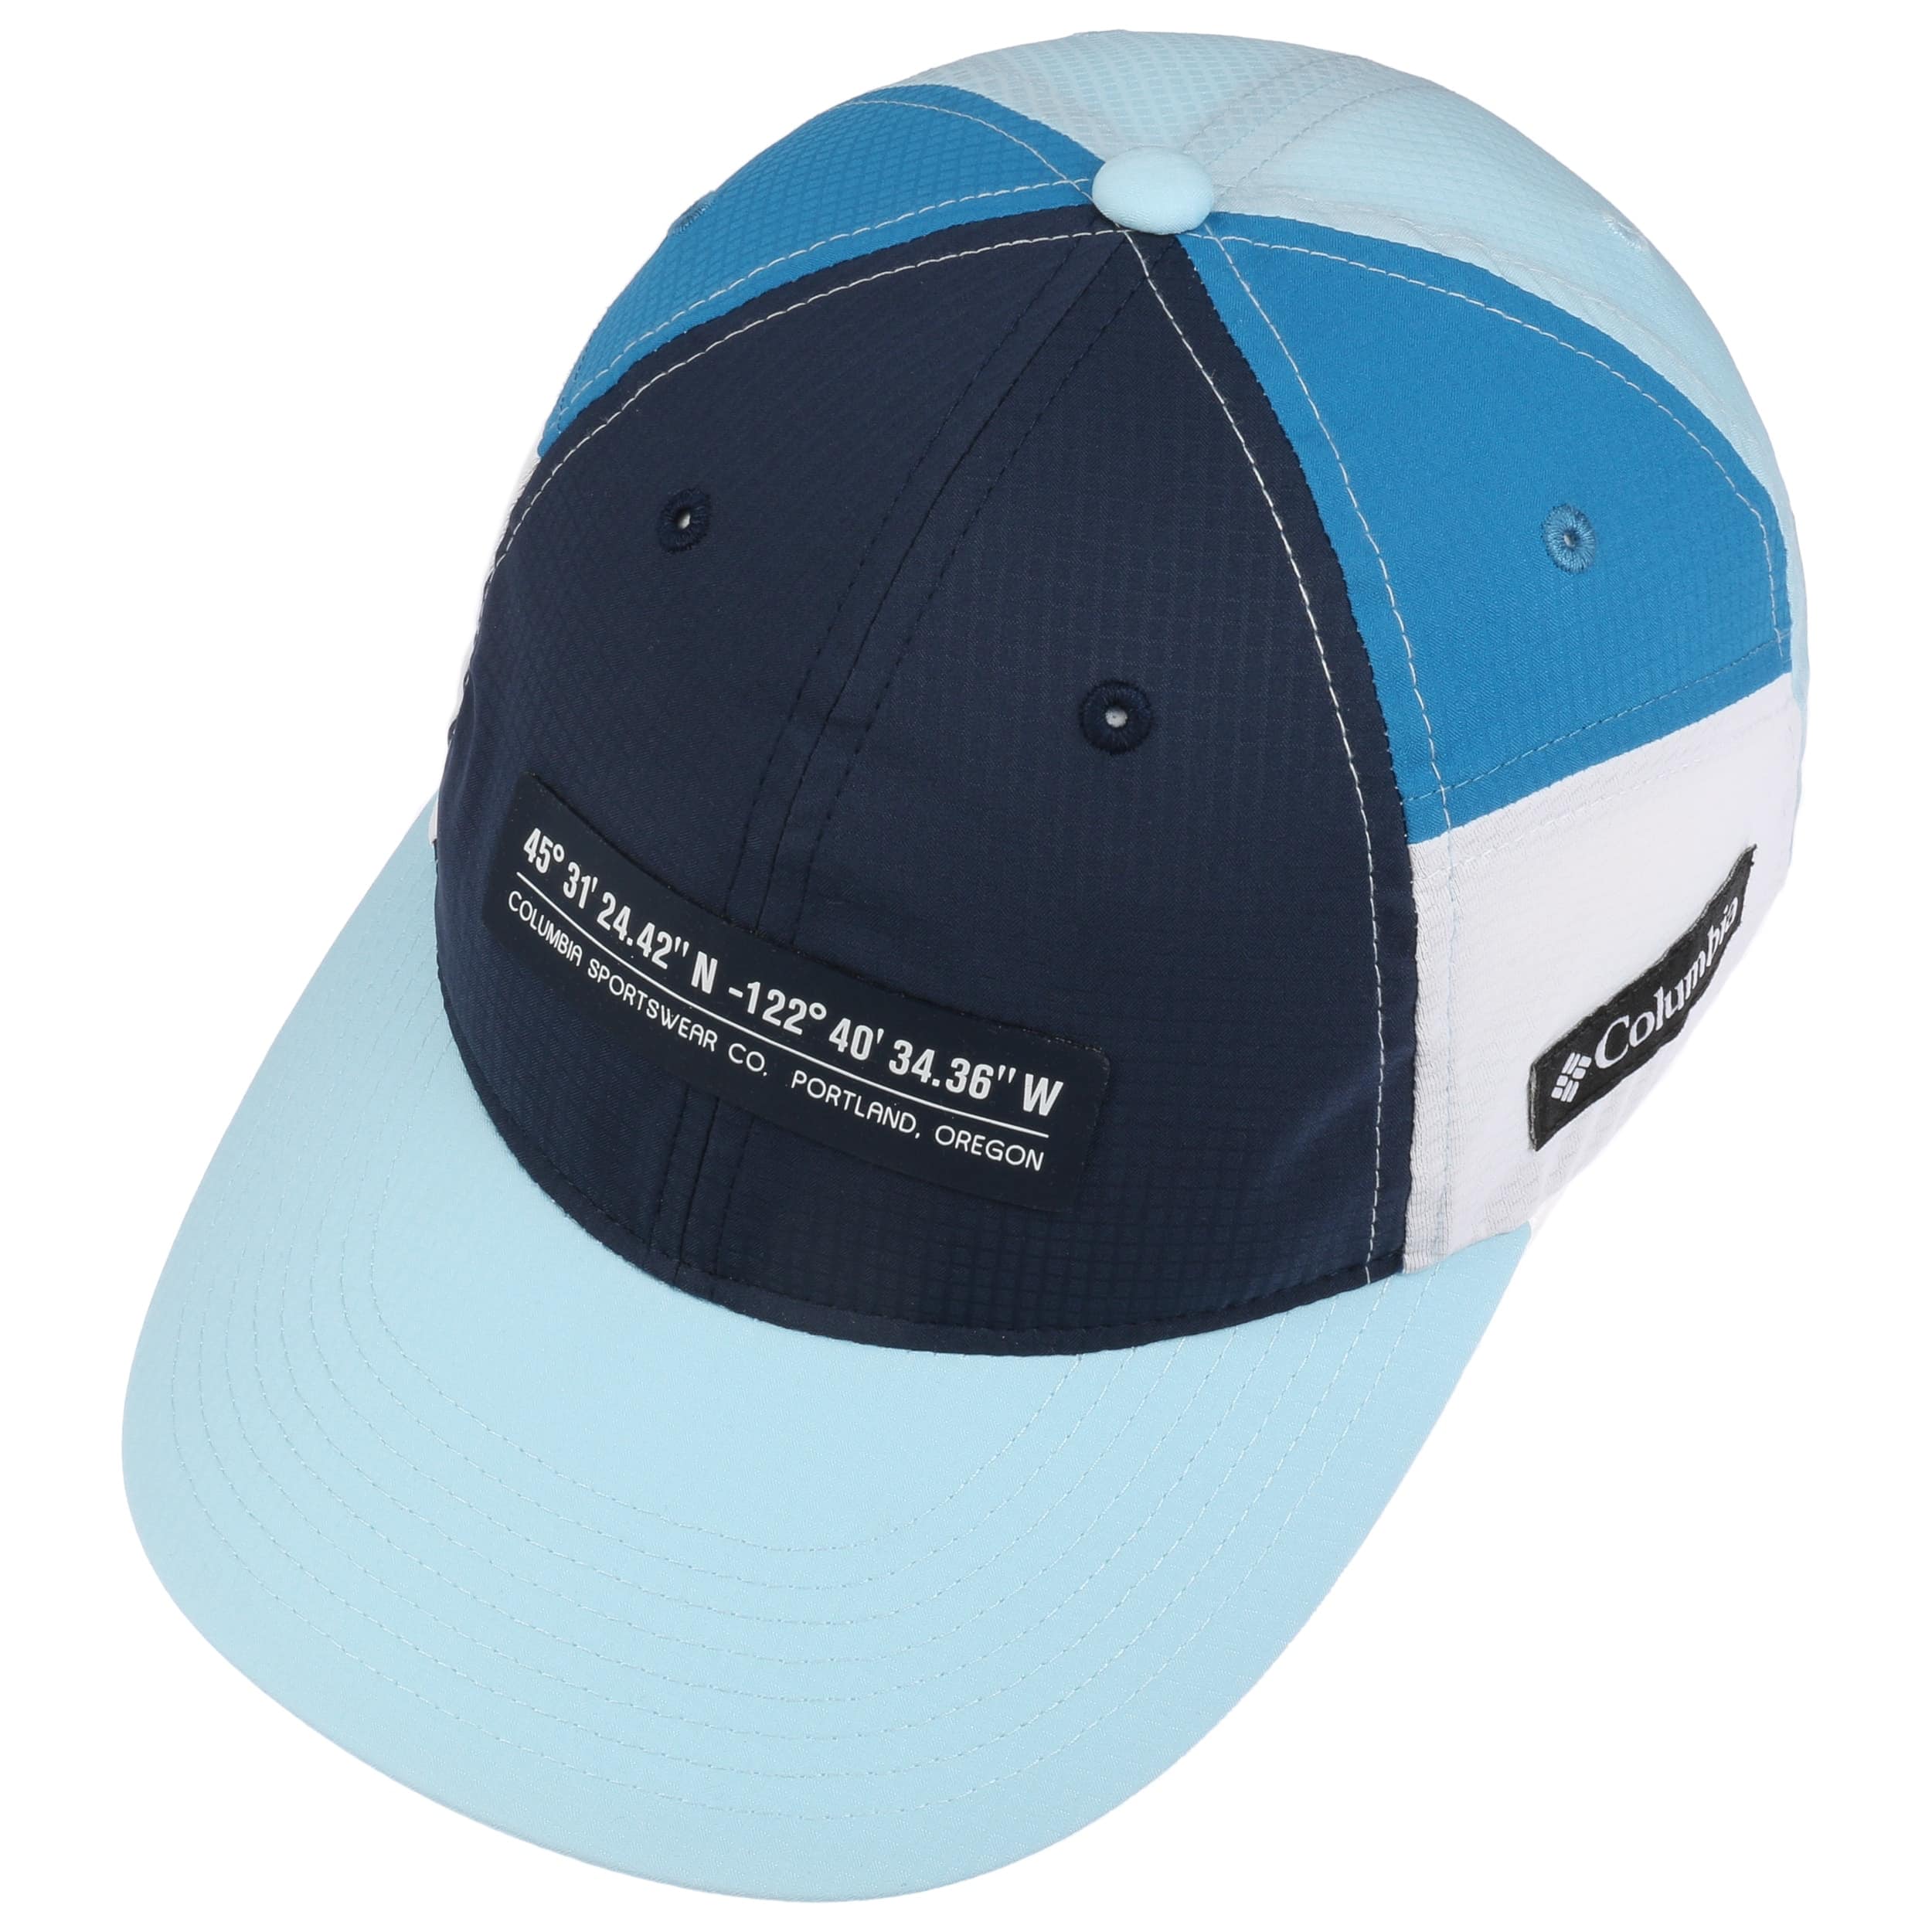 Ripstop Cap by Columbia - 22,95 €